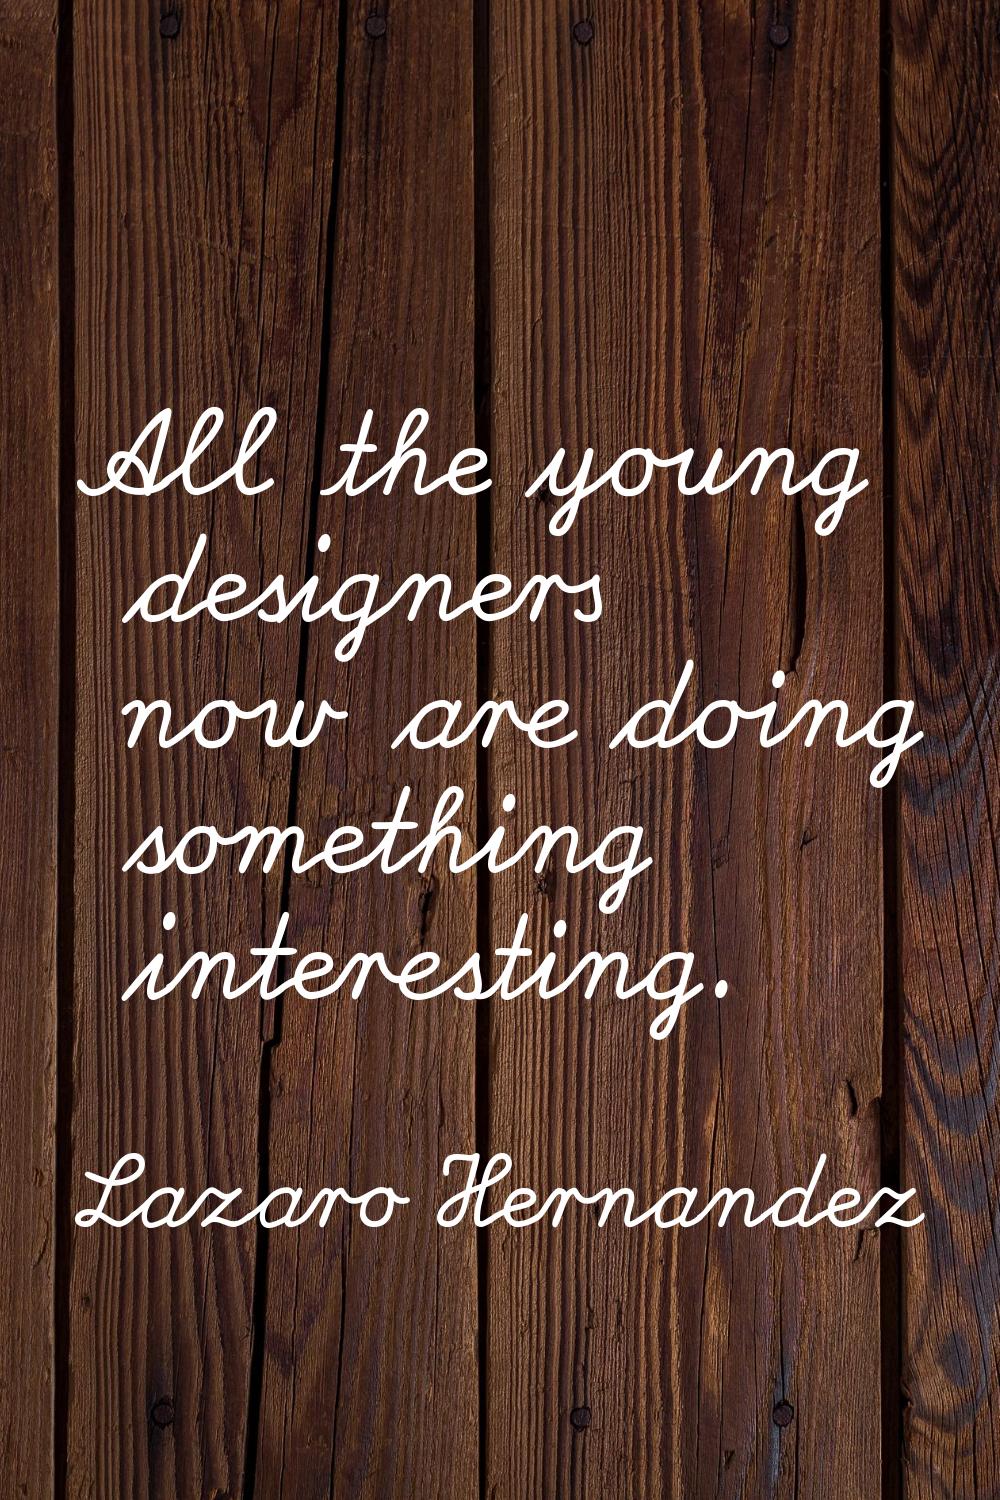 All the young designers now are doing something interesting.